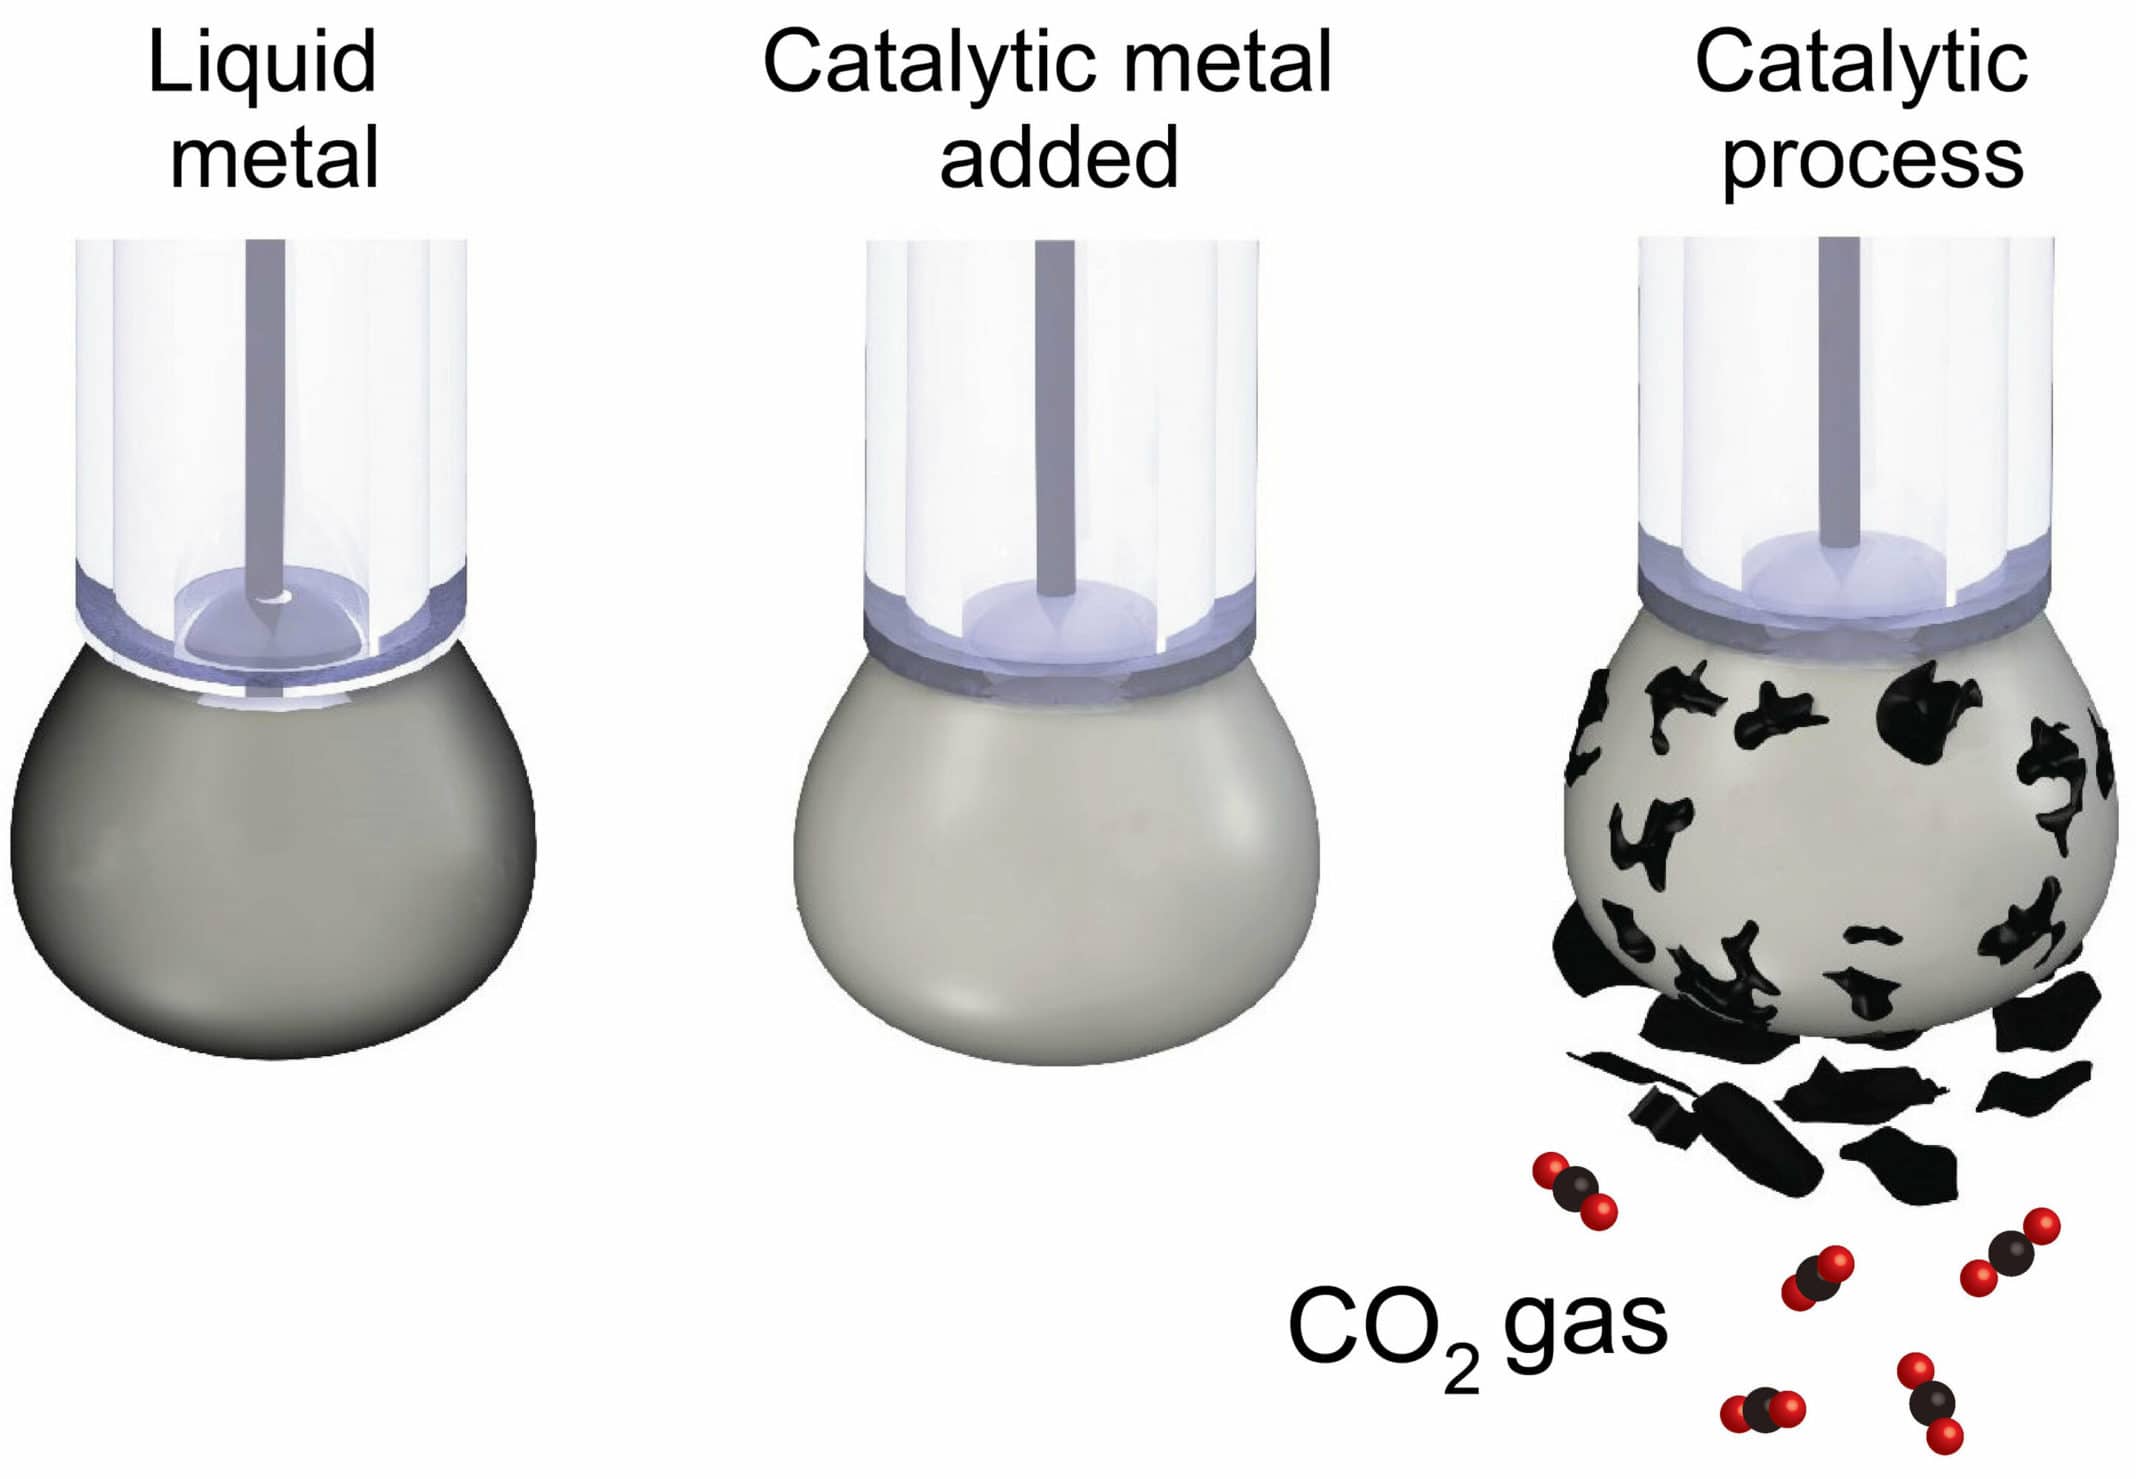 A schematic illustration showing how liquid metal is used as a catalyst for converting carbon dioxide into solid coal. Credit: RMIT University